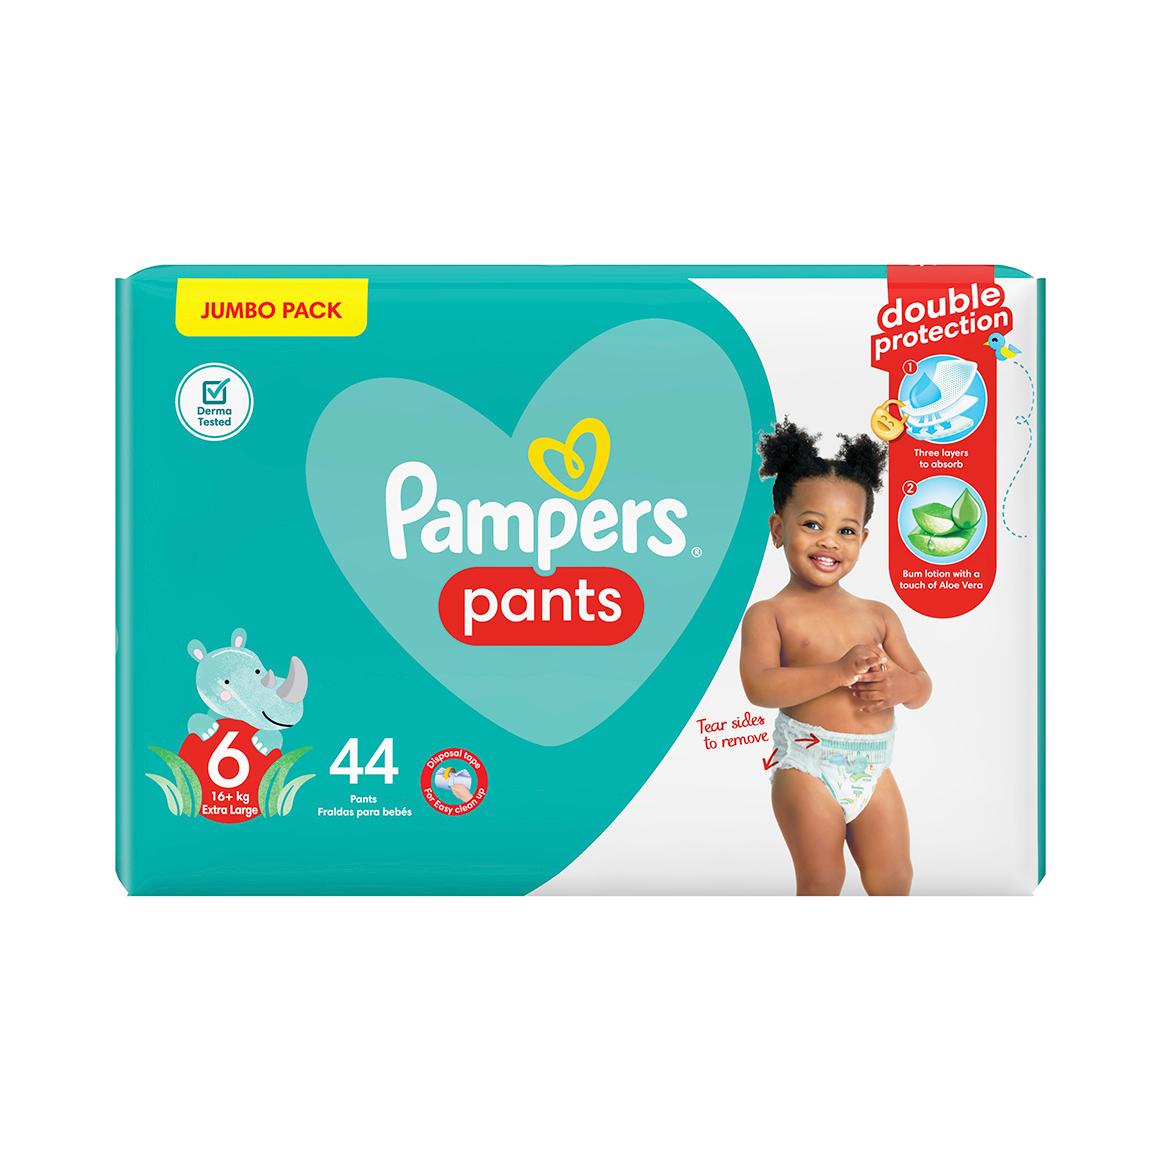 pampers active baby 4 62 szt